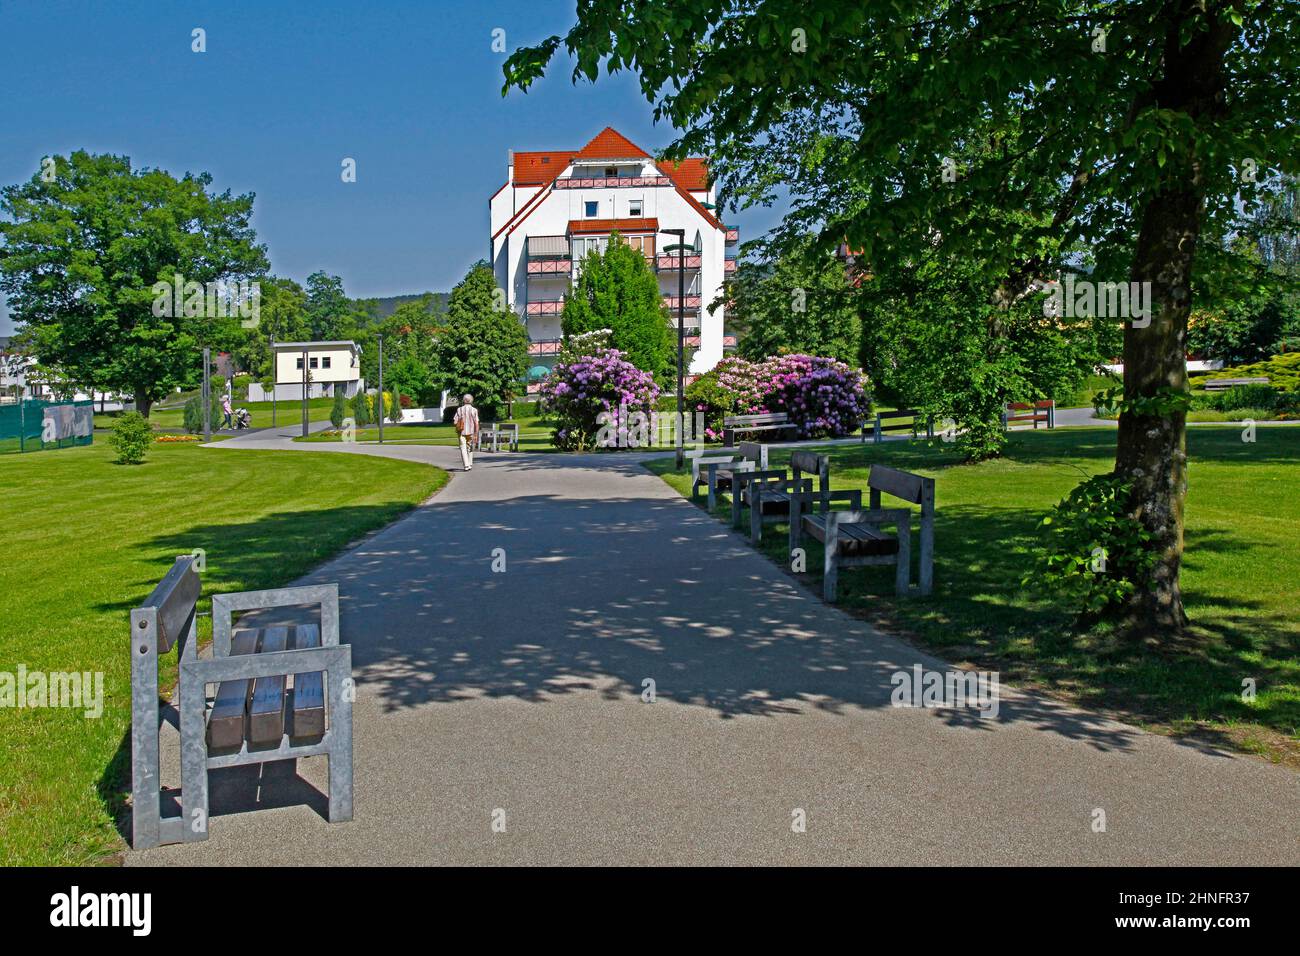 Spa park, spa guests, Bad Soden-Salmuenster, Hesse, Germany Stock Photo